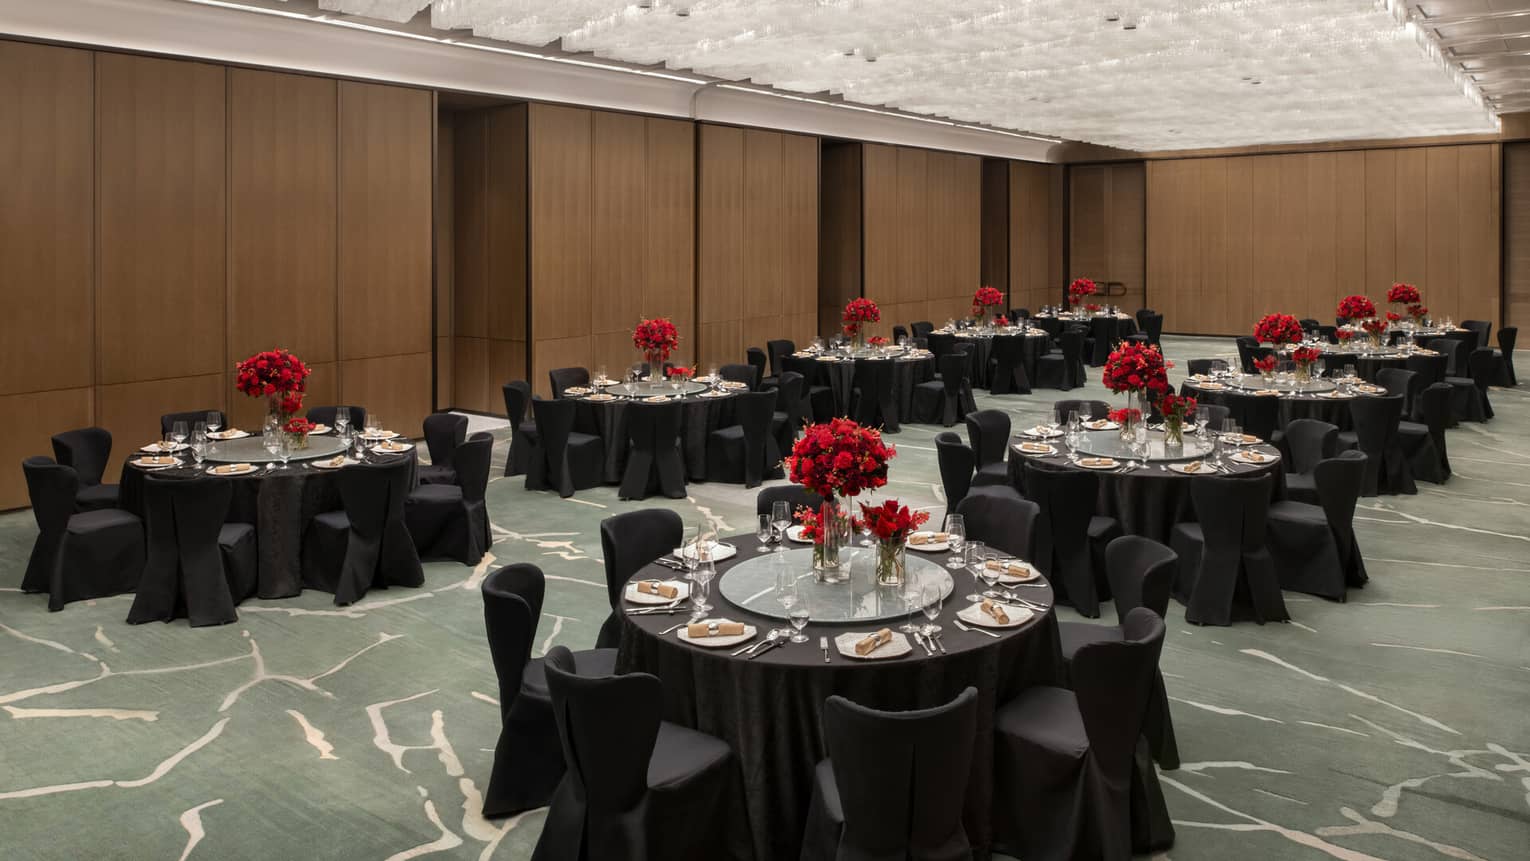 A spacious ballroom with wooden walls, with several black banquet tables set up with plates, glassware, linens and red floral arrangements